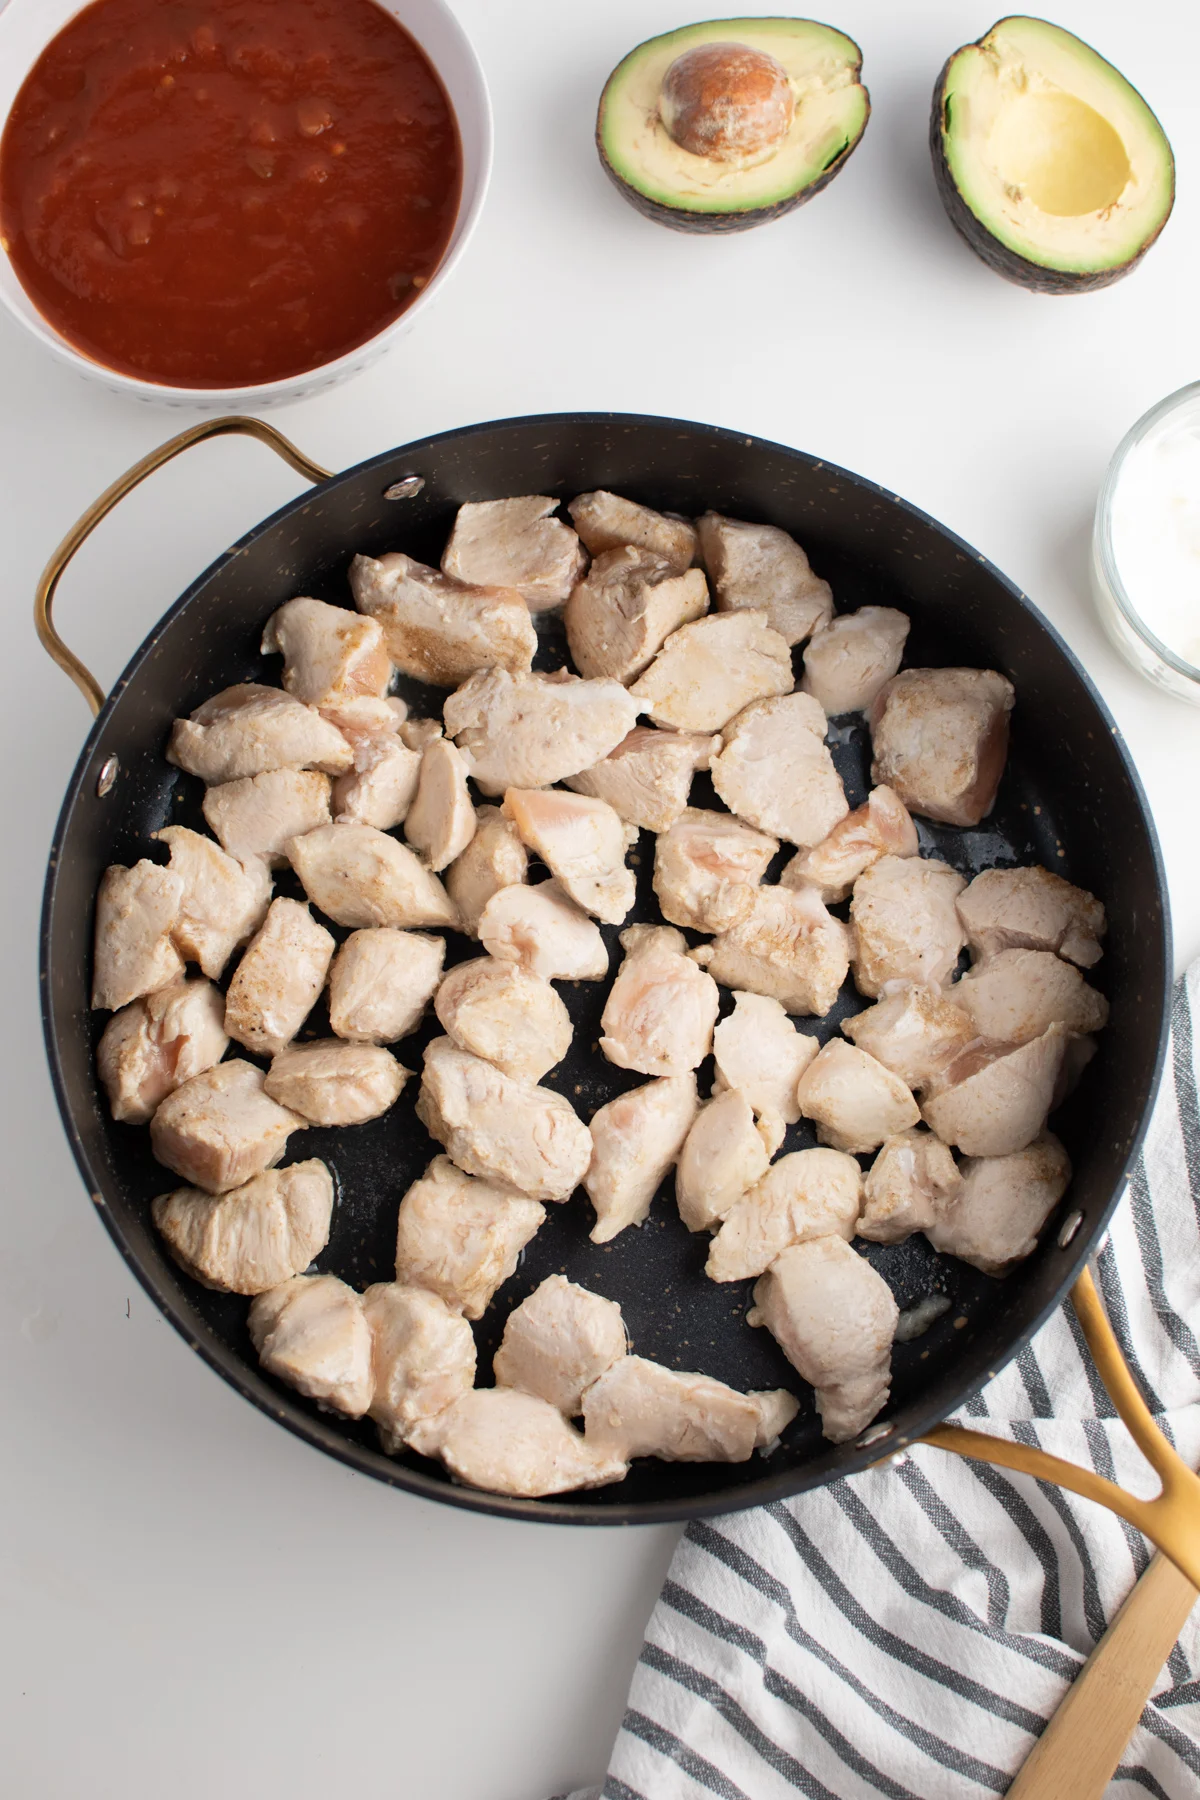 Cooked chicken pieces in large skillet next to bowl of picante sauce and avocado.